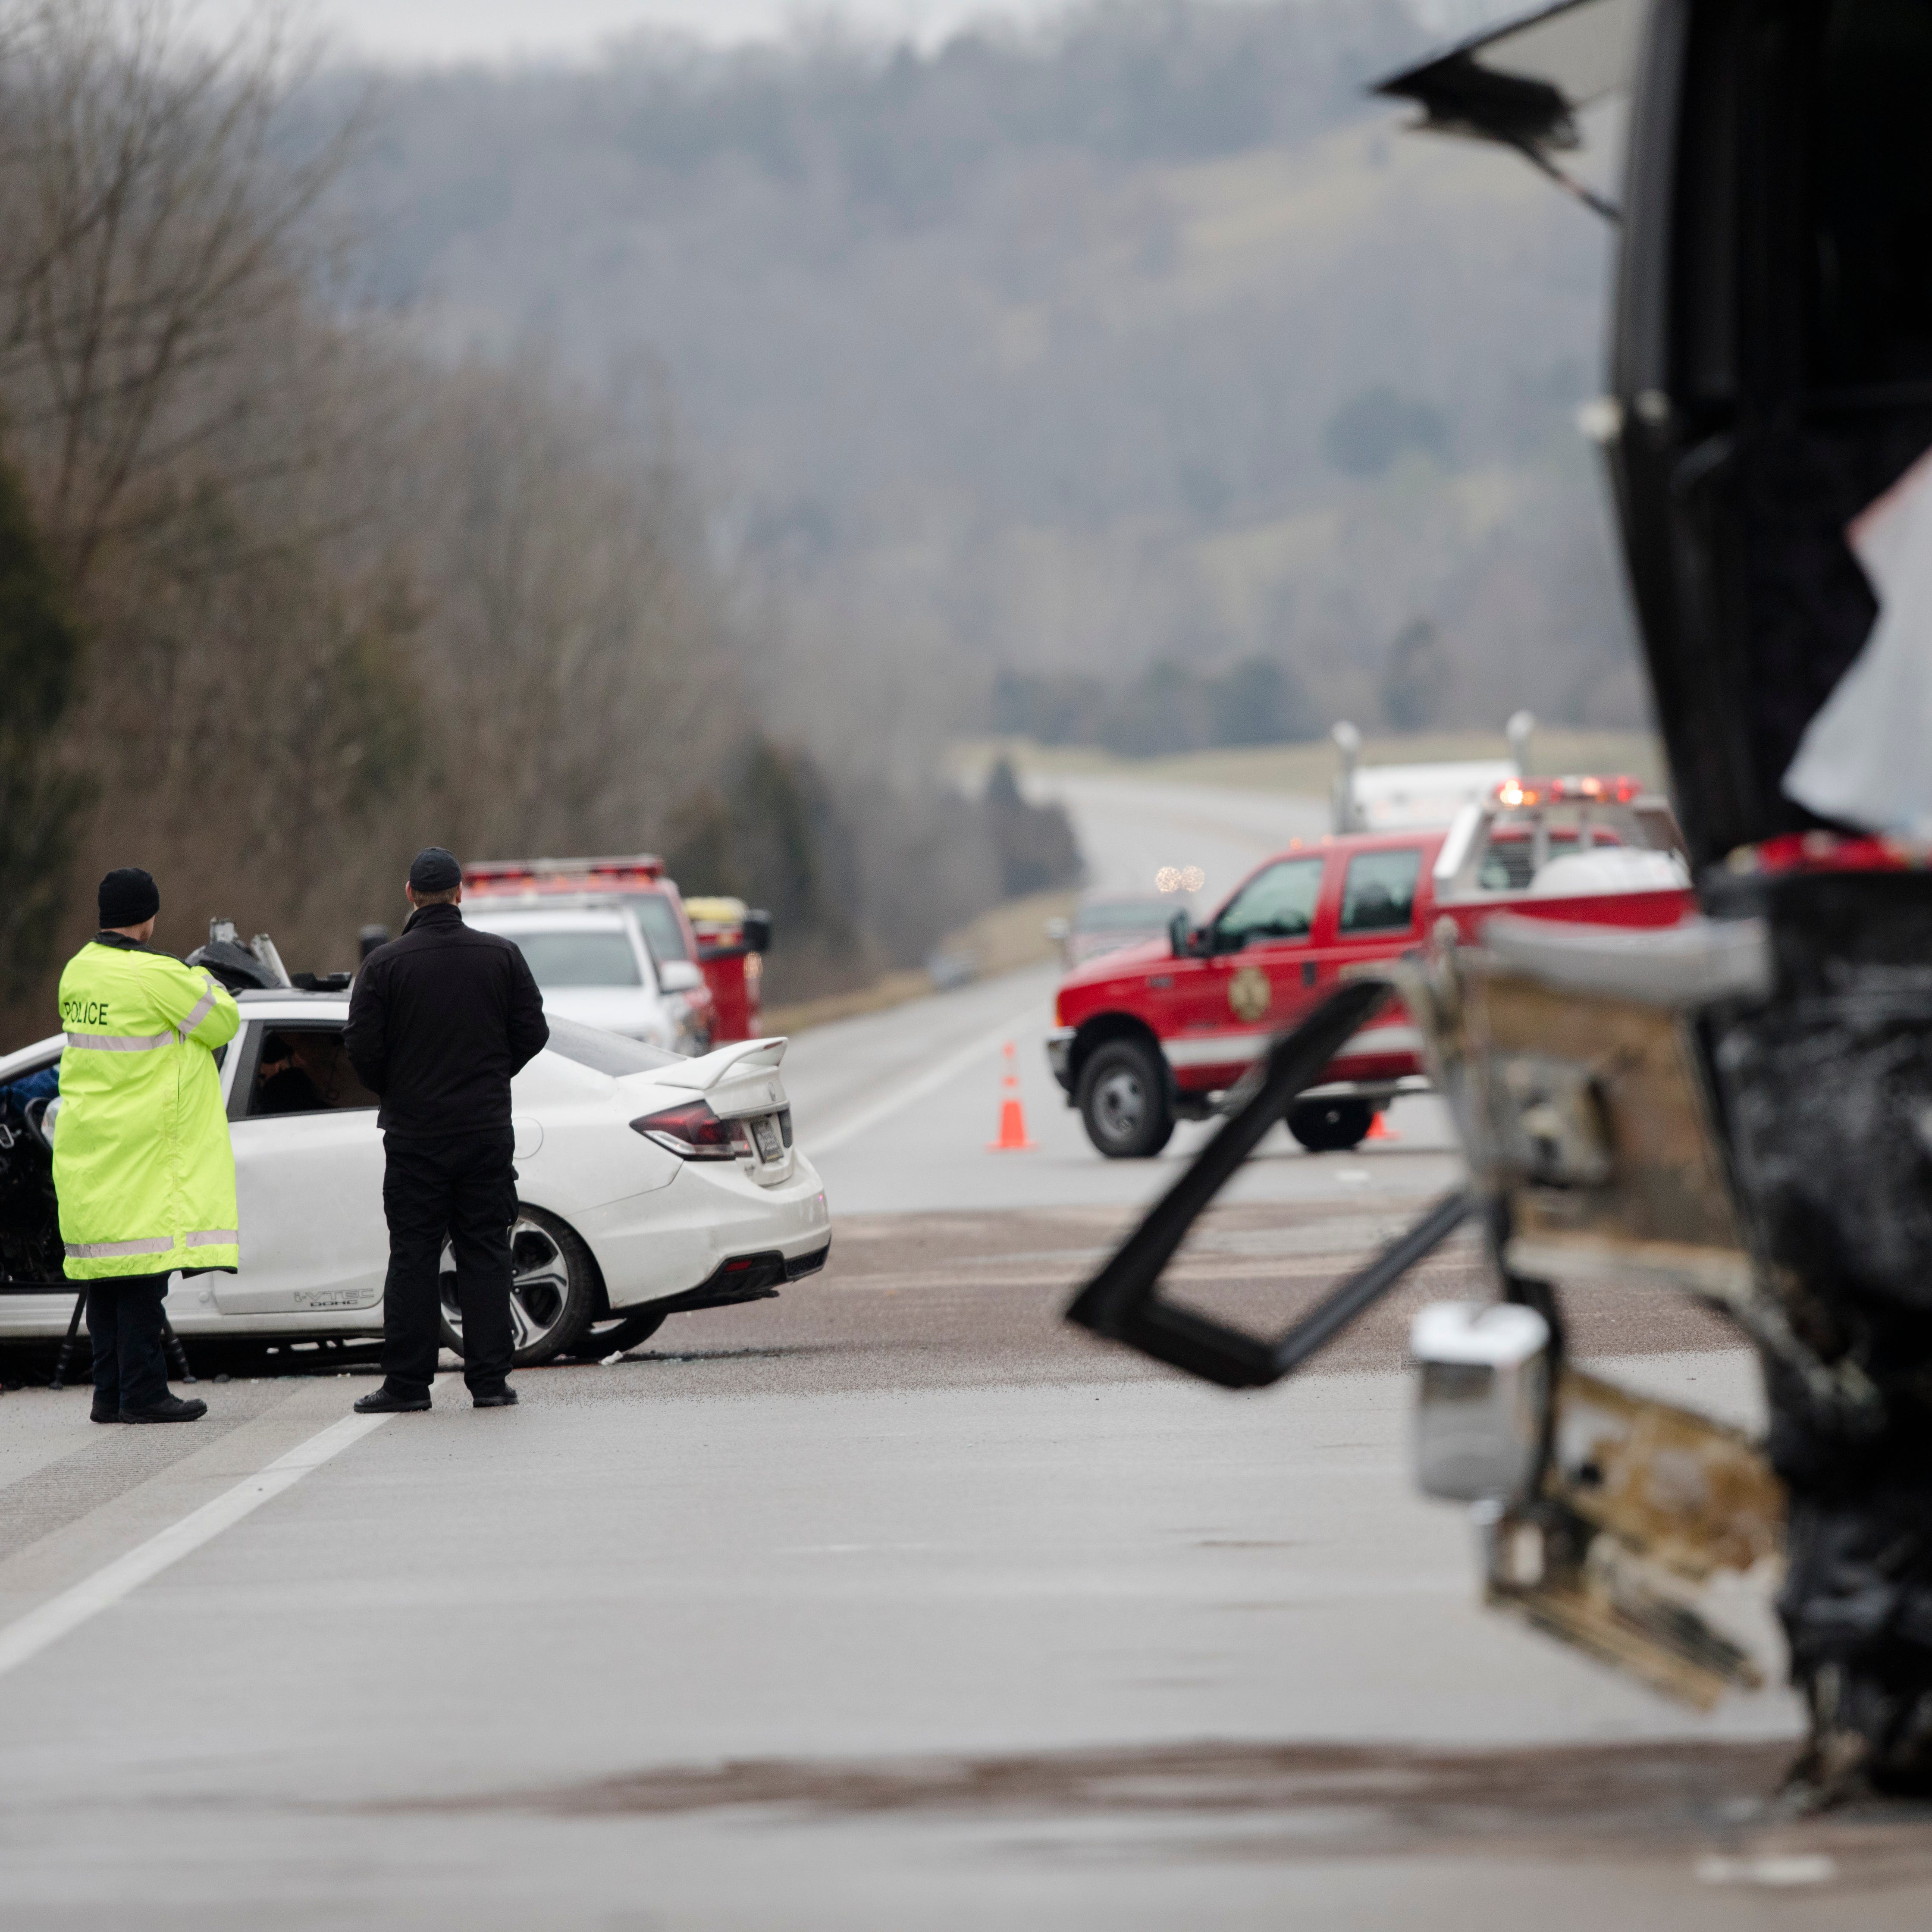 Emergency crews work the scene of a fatal crash involving a charter bus and car on the AA highway in Campbell County, Ky., Jan. 25, 2020. Campbell County police say a charter bus filled with Covington Catholic students was coming from the March for Life in Washington, D.C., when the bus driver hit a vehicle. The driver of the vehicle died.